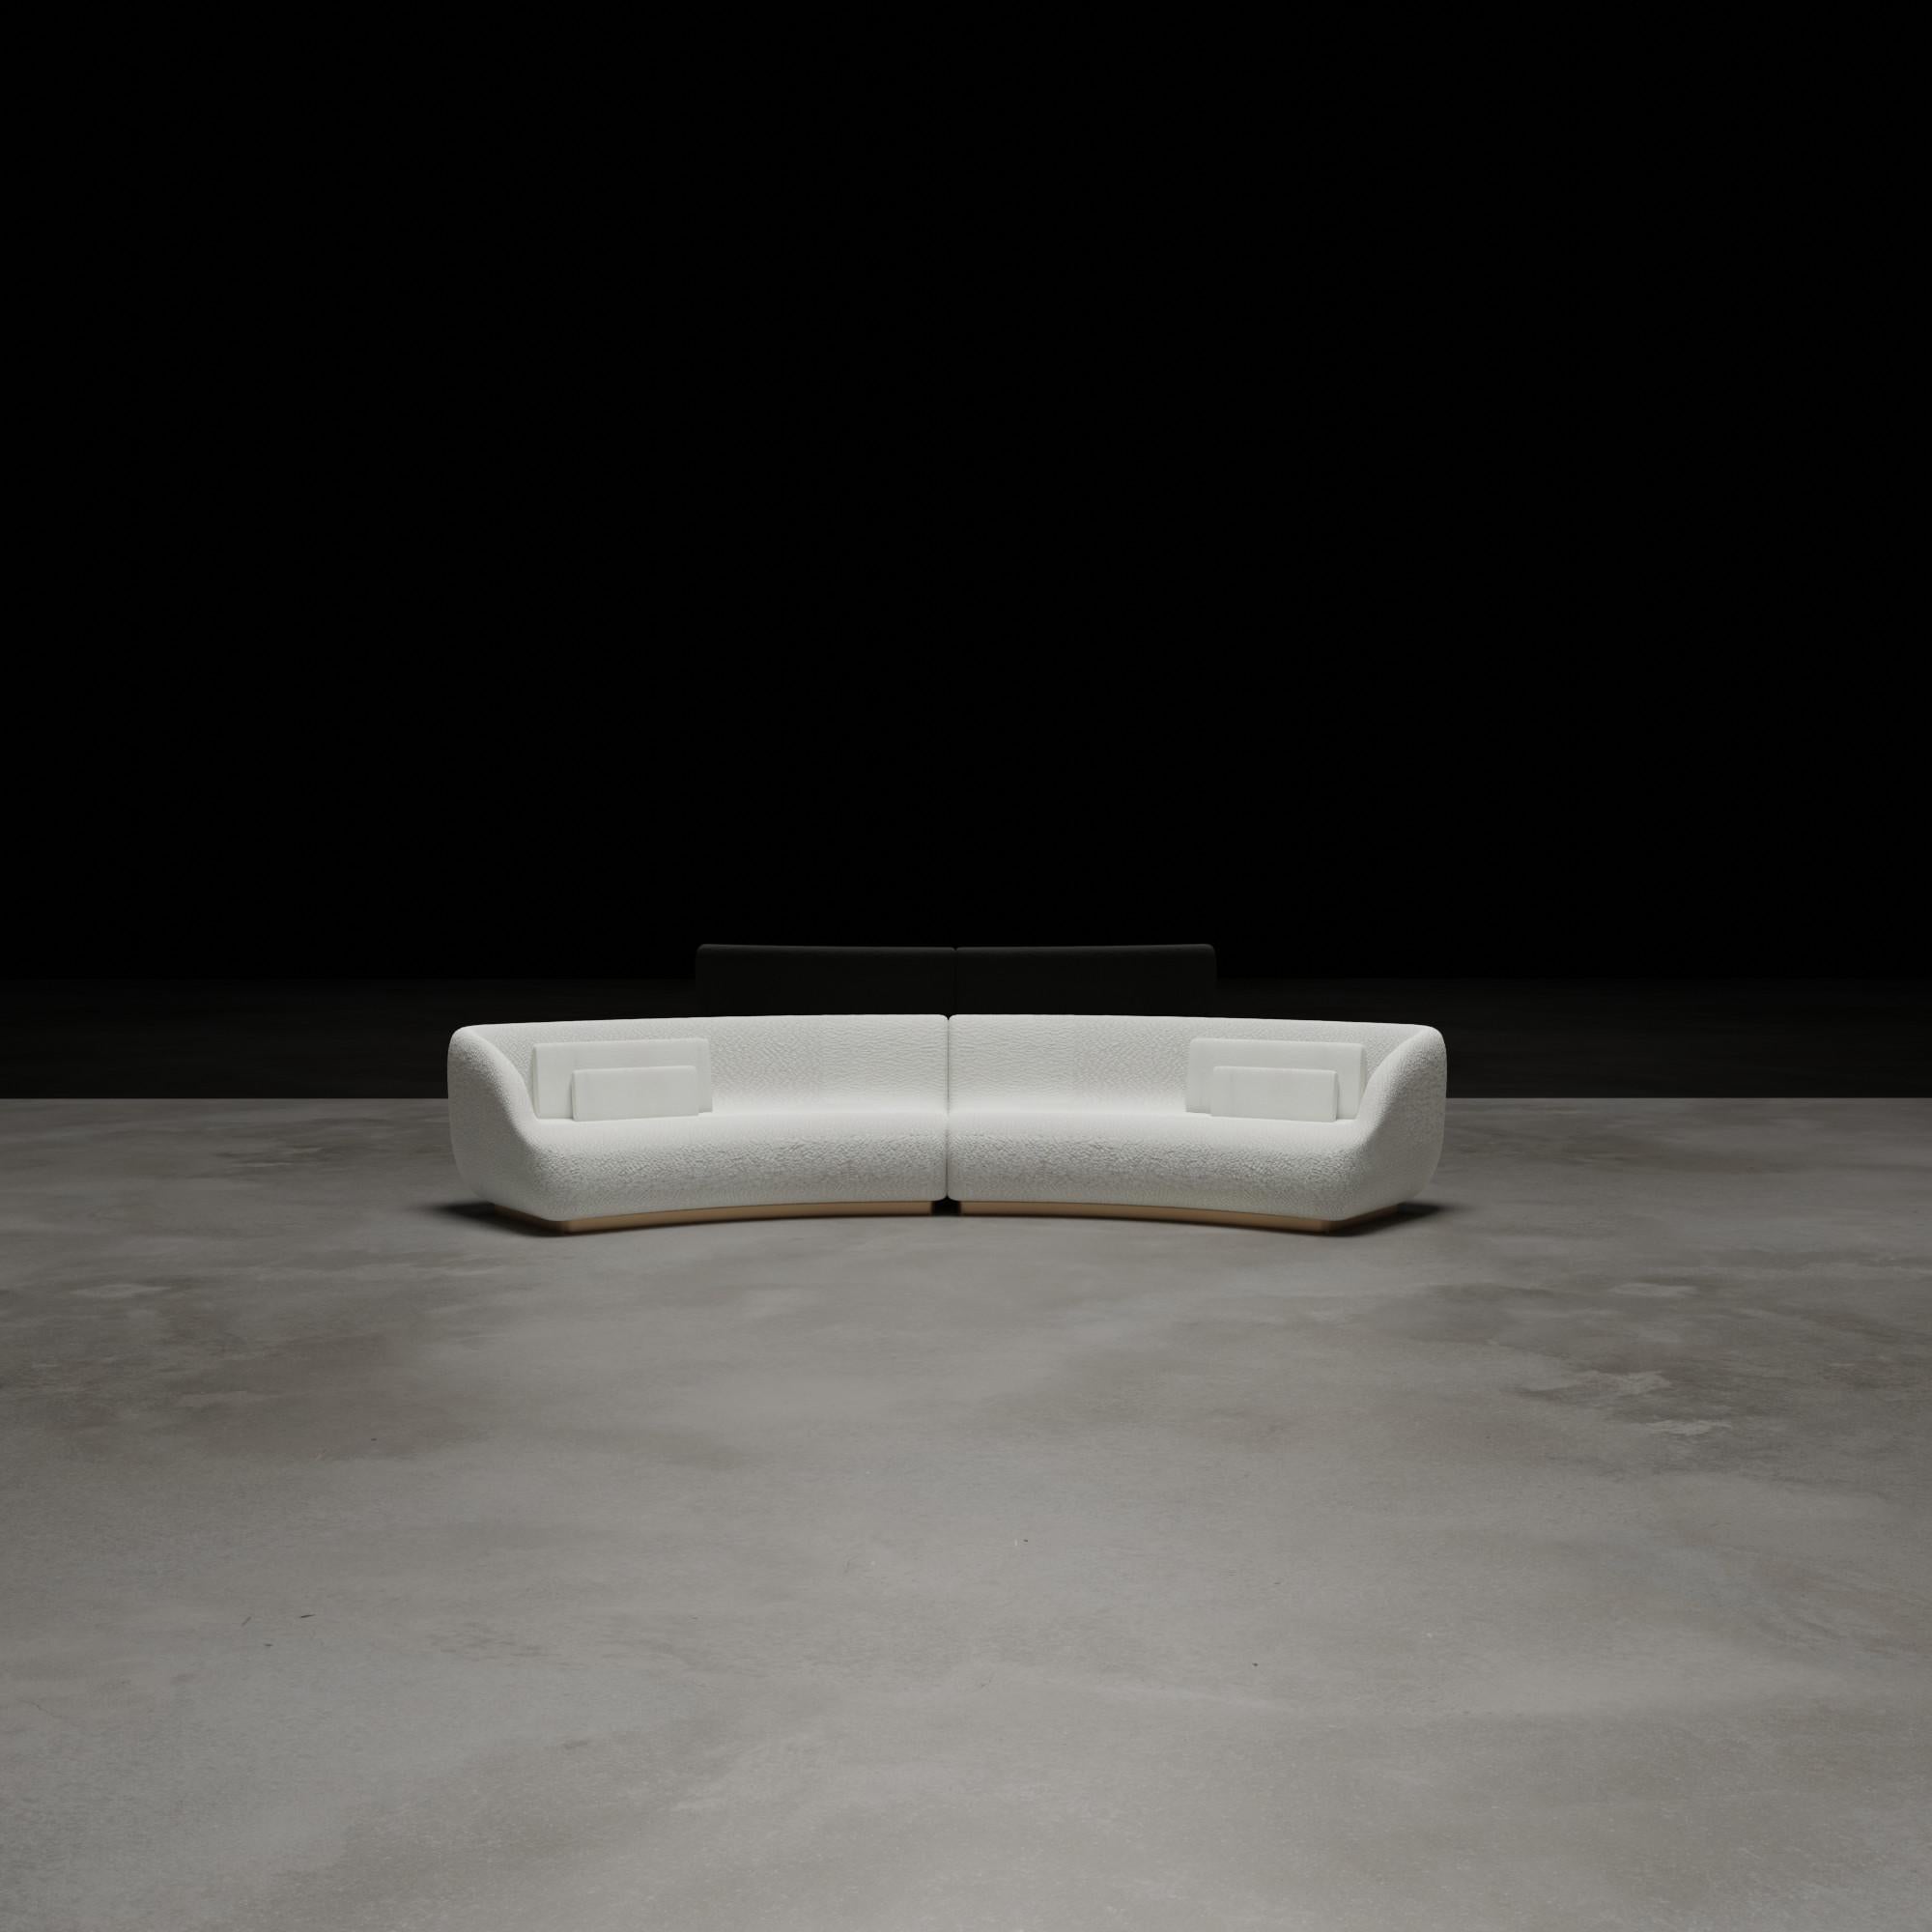 The 2021 Edition to our Canapé sofa series, demi-lune. Elegantly curved and comprised of two elements that can also stand alone or separate to accommodate a center positioned cocktail table or side cabinet, shown in wool bouclé with standard hand